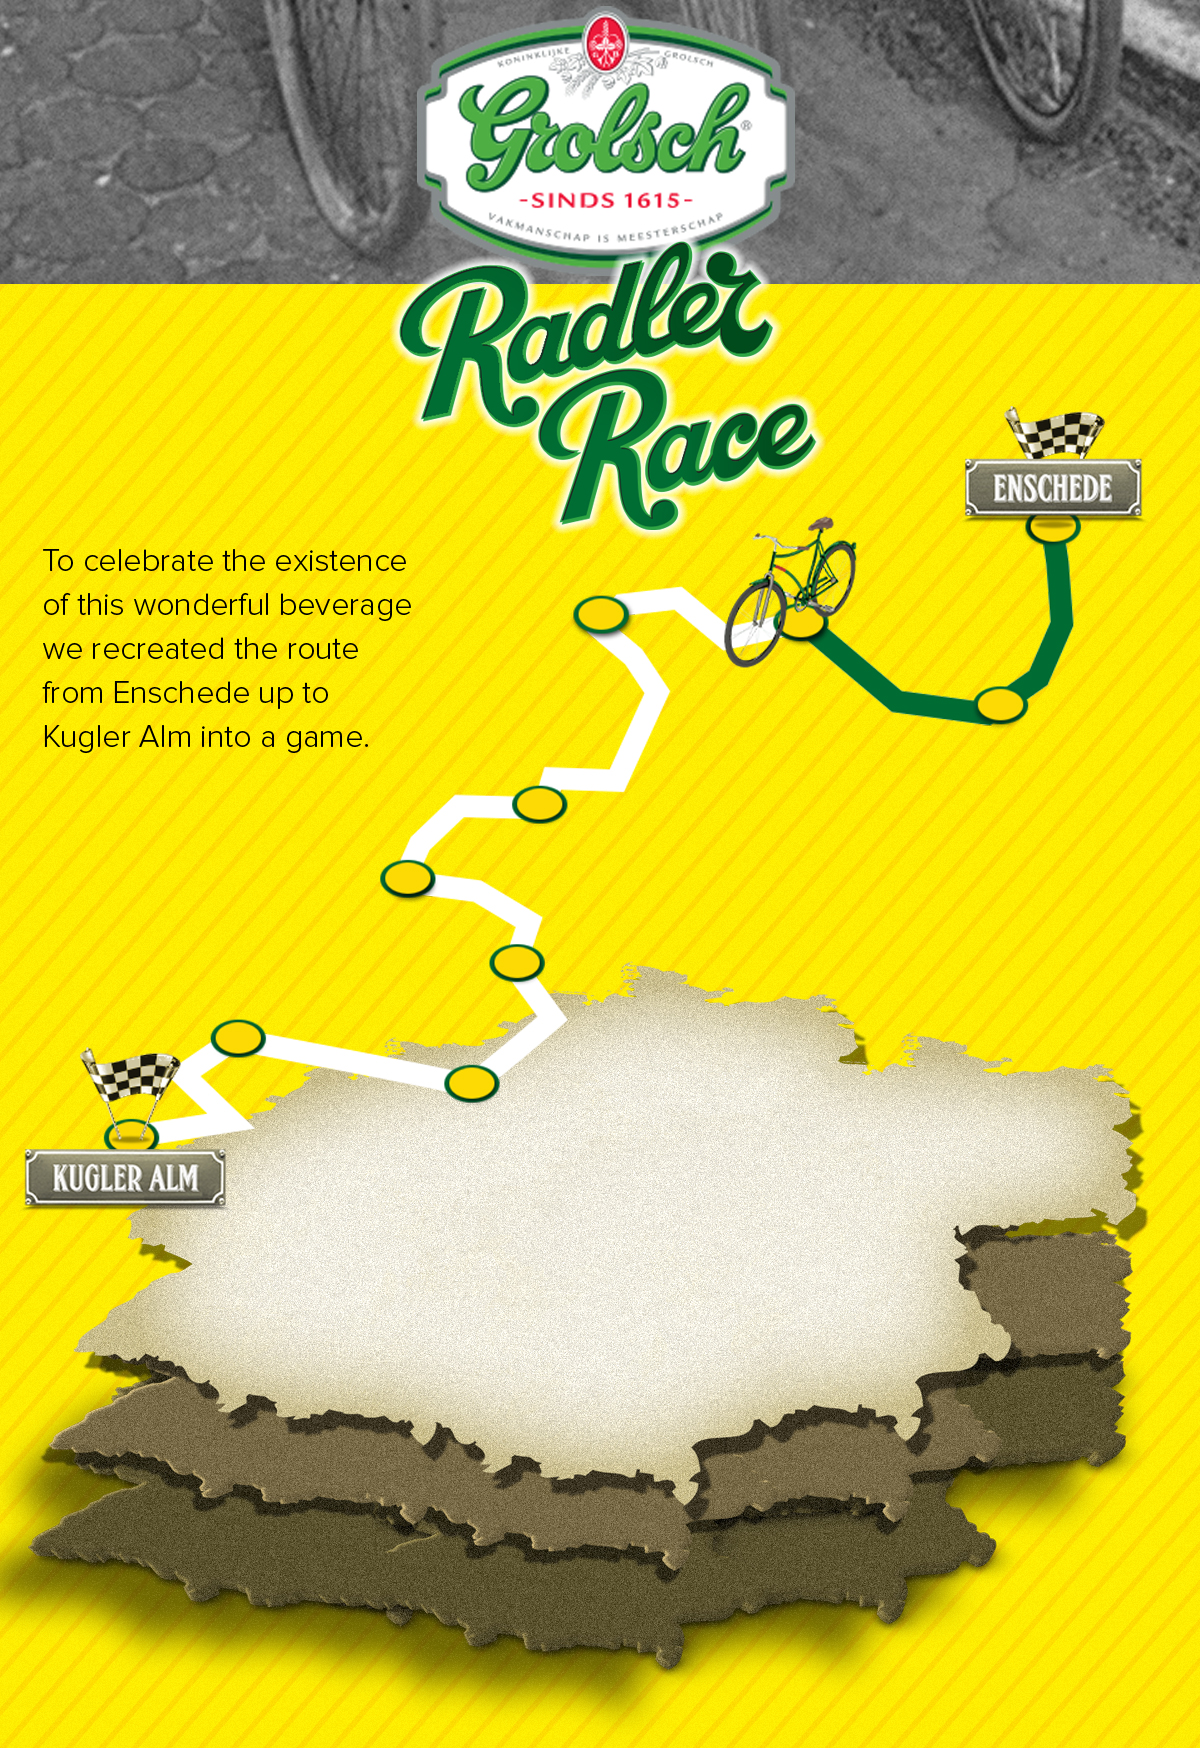 Grolsch Radler | To celebrate the existence of this wonderful beverage we recreated the route from Enschede up to Kugler Alm into a game.